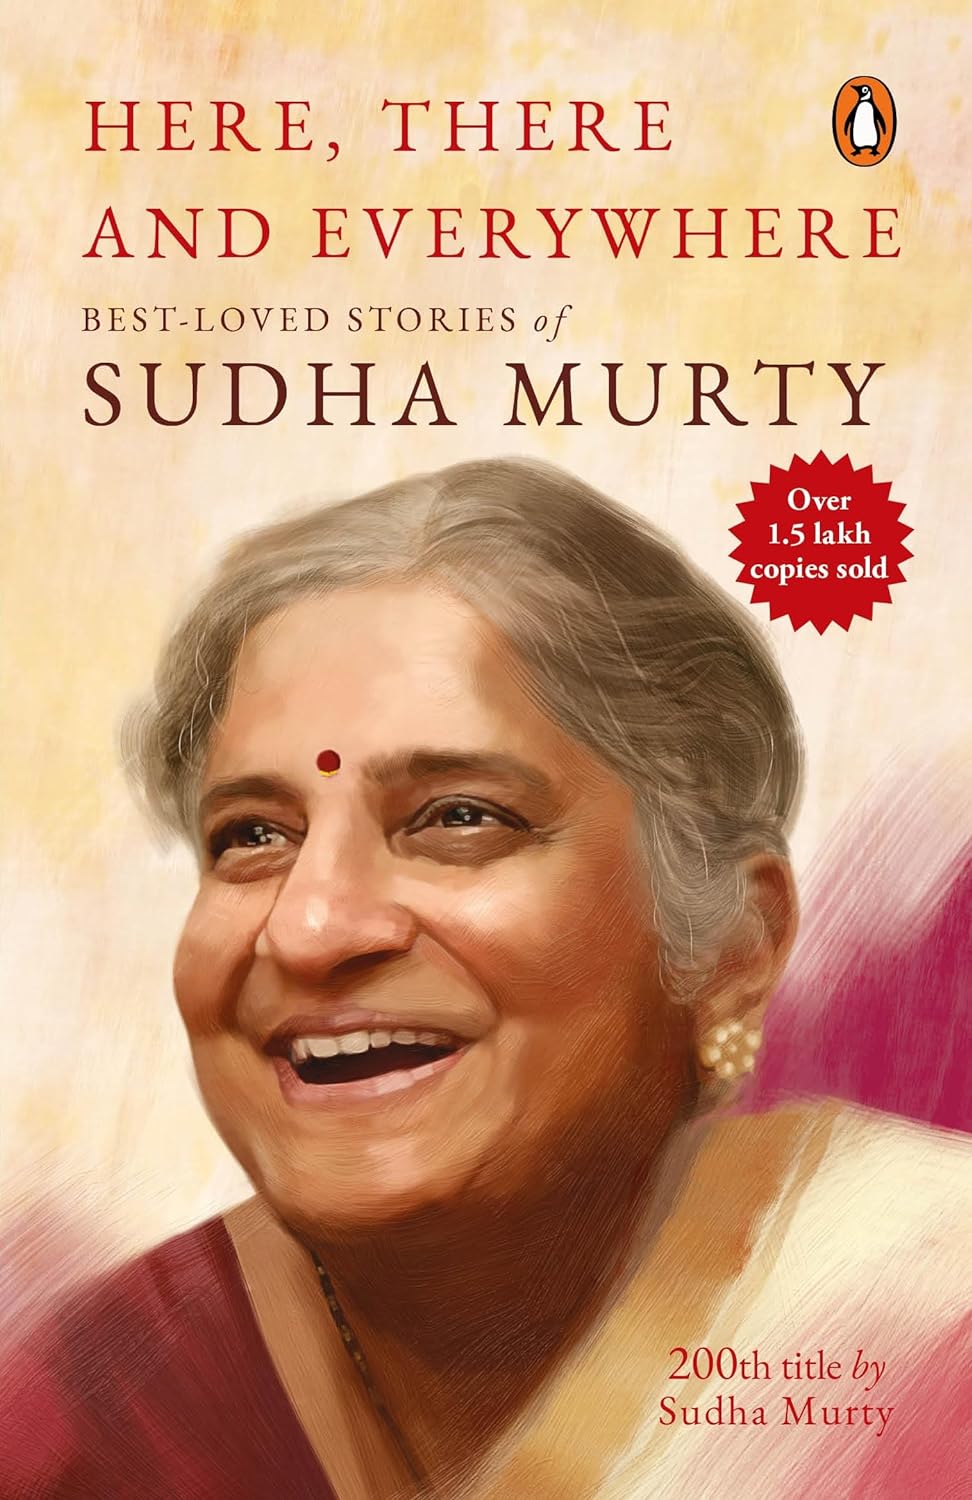 Here, There and Everywhere: Best-Loved Stories by Sudha Murty